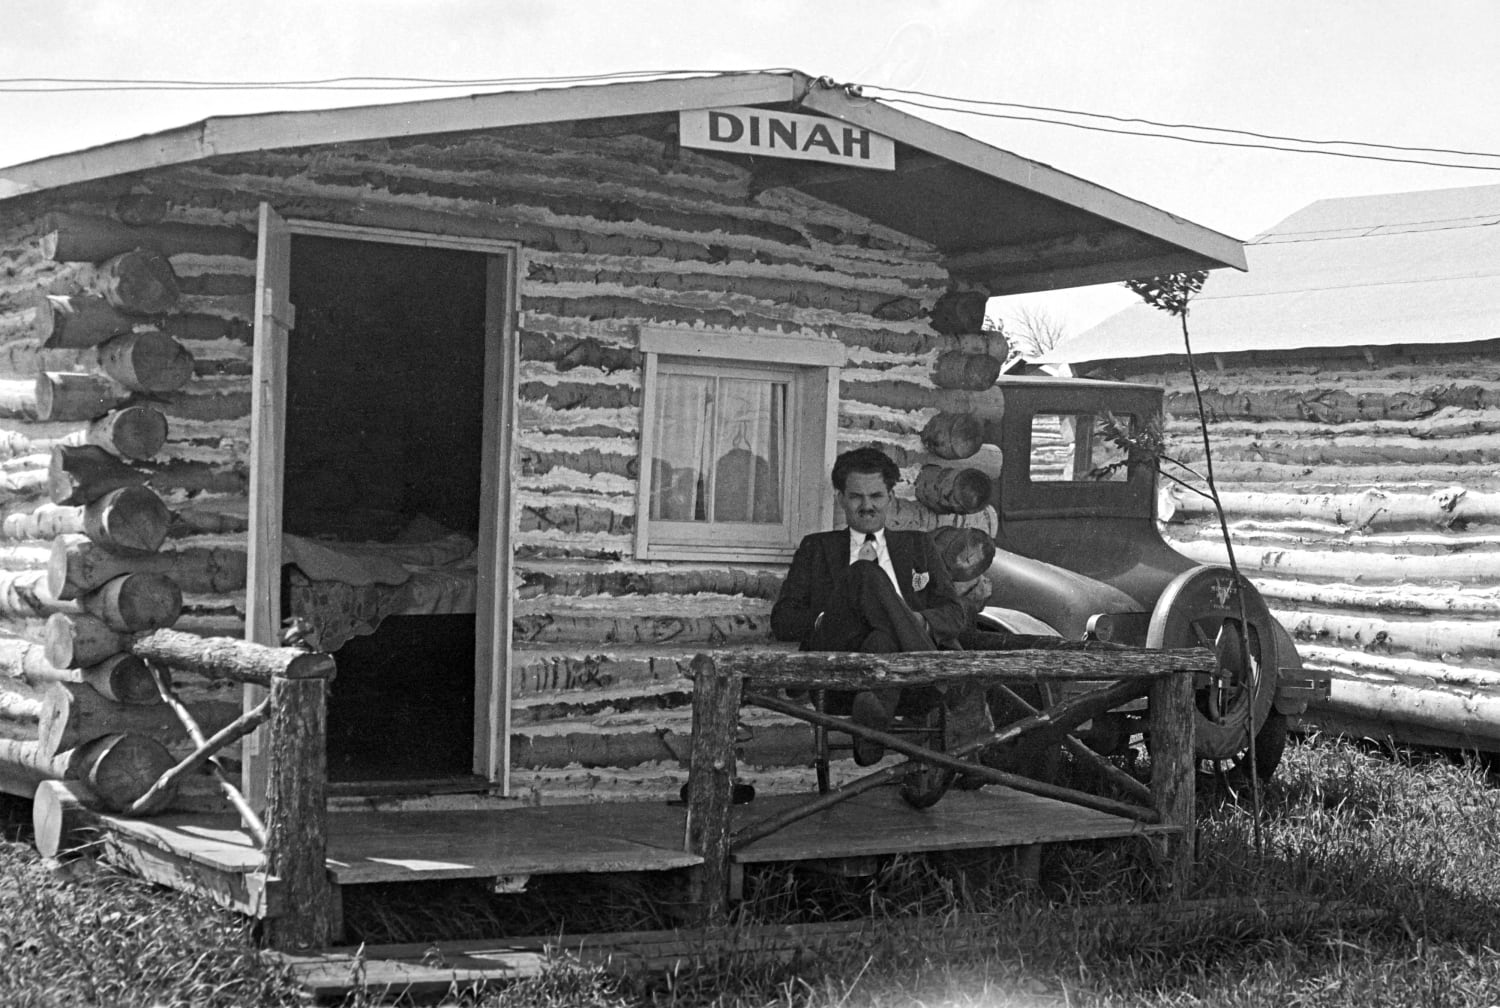 1930. My father, age 25. He and my mother were on a sight-seeing trip from Canton, Ohio to Niagara Falls. (I think for their 1-year anniversary.) They stayed overnight at these cabins.